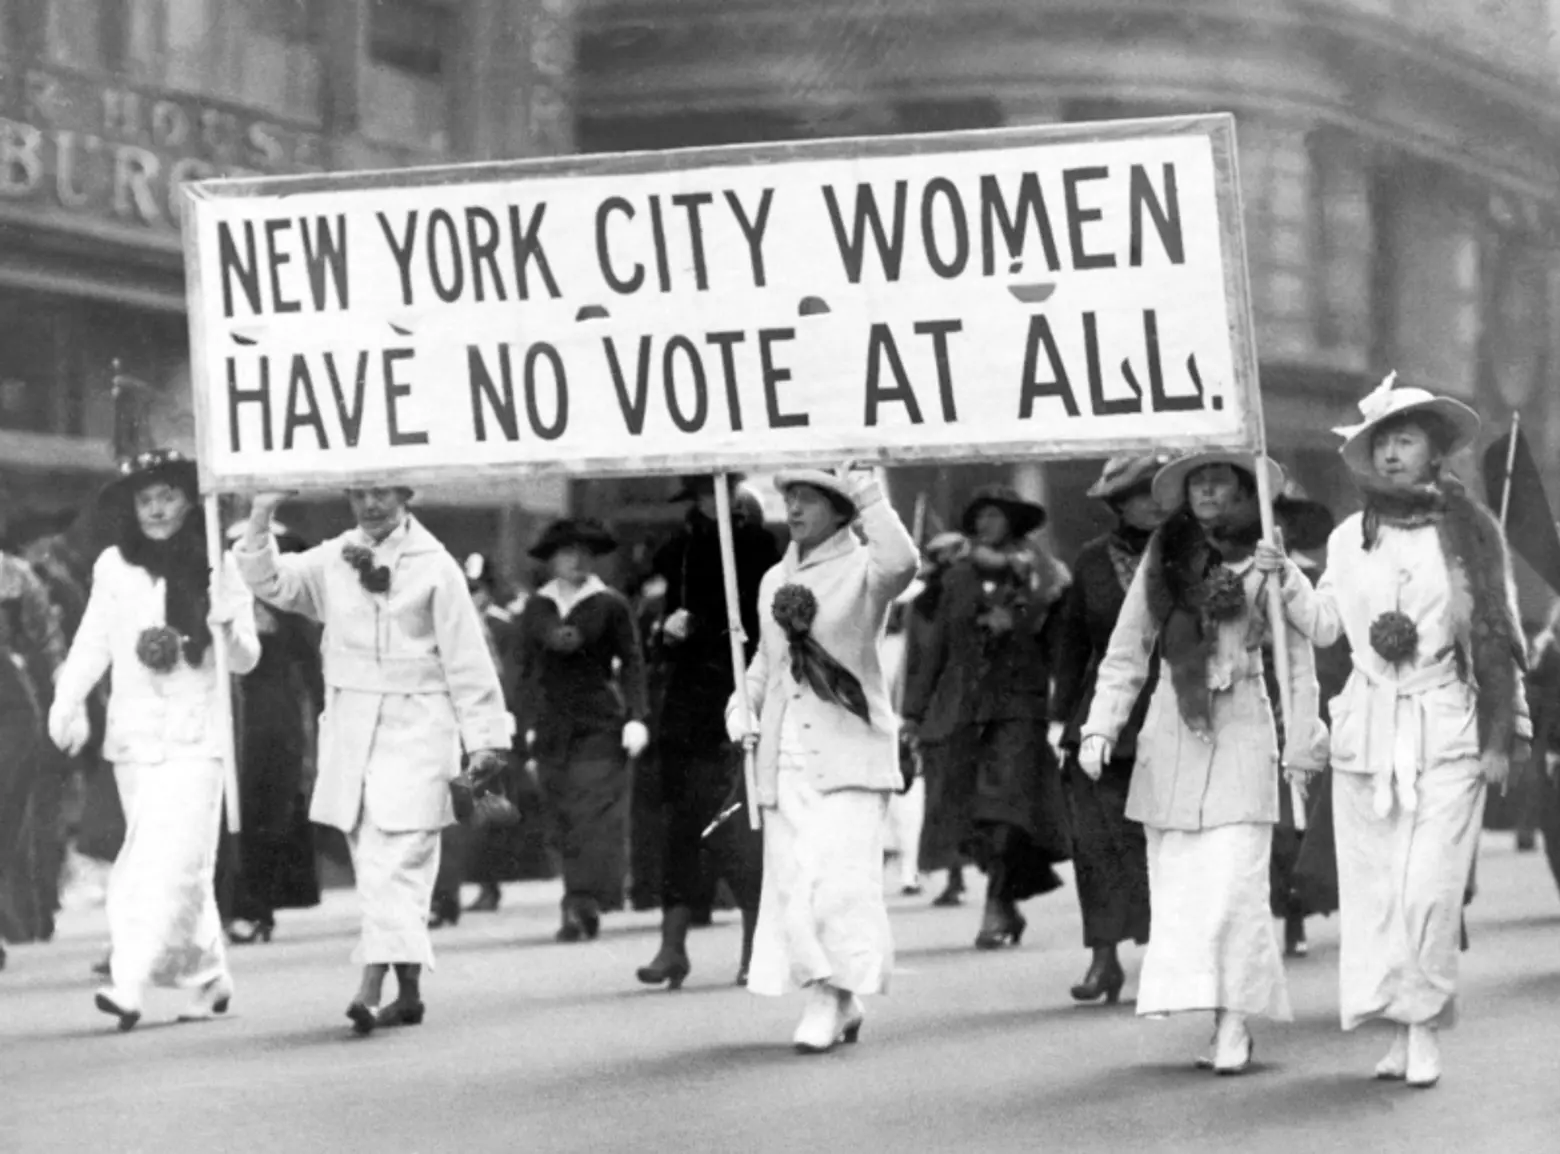 This year, celebrate the centennial of women’s suffrage and Susan B. Anthony